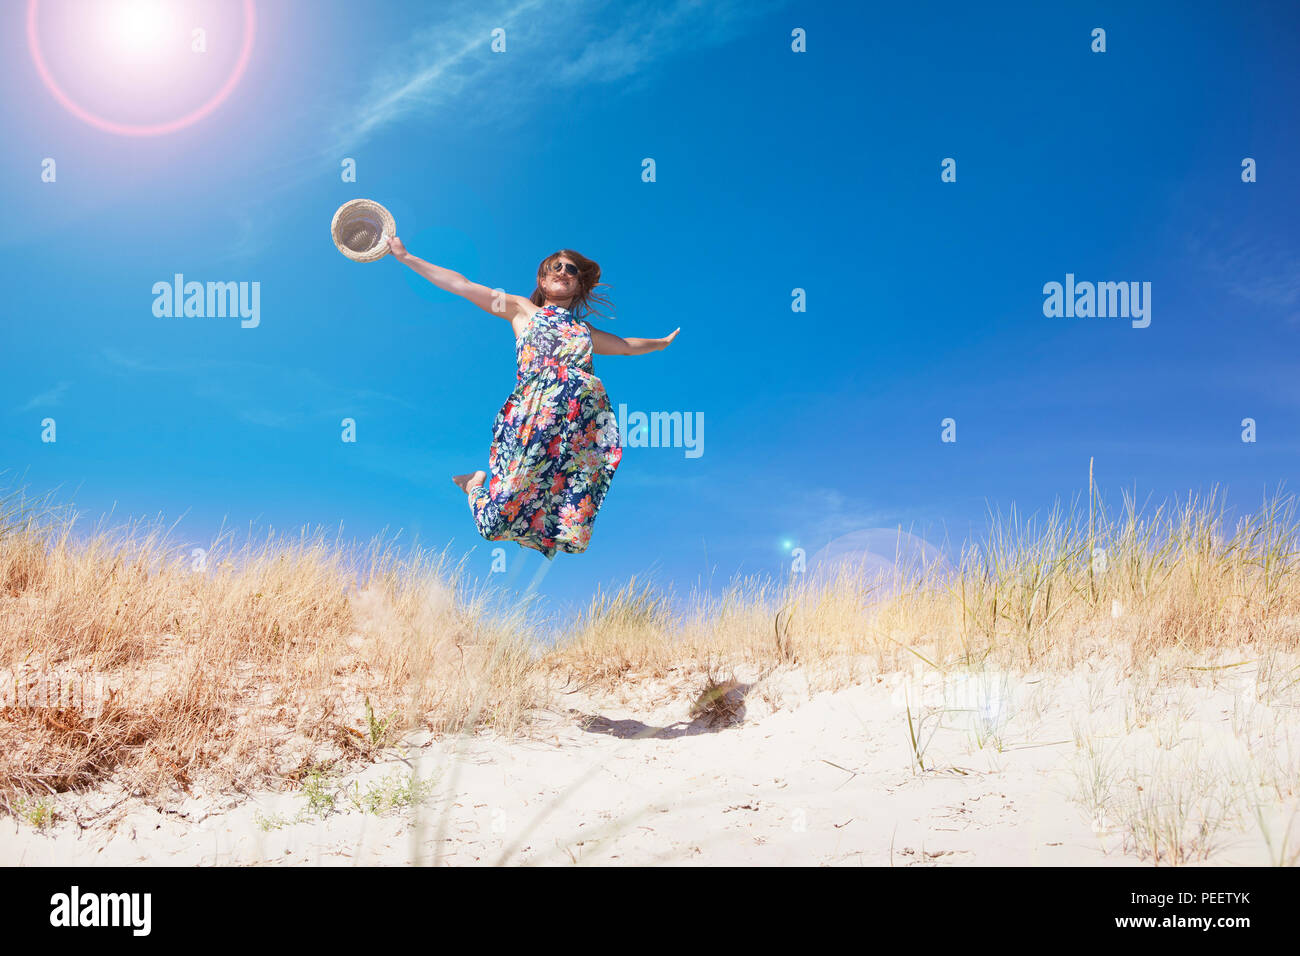 a young woman with long brown hair and sunglasses on the beach. jumps in the air Stock Photo